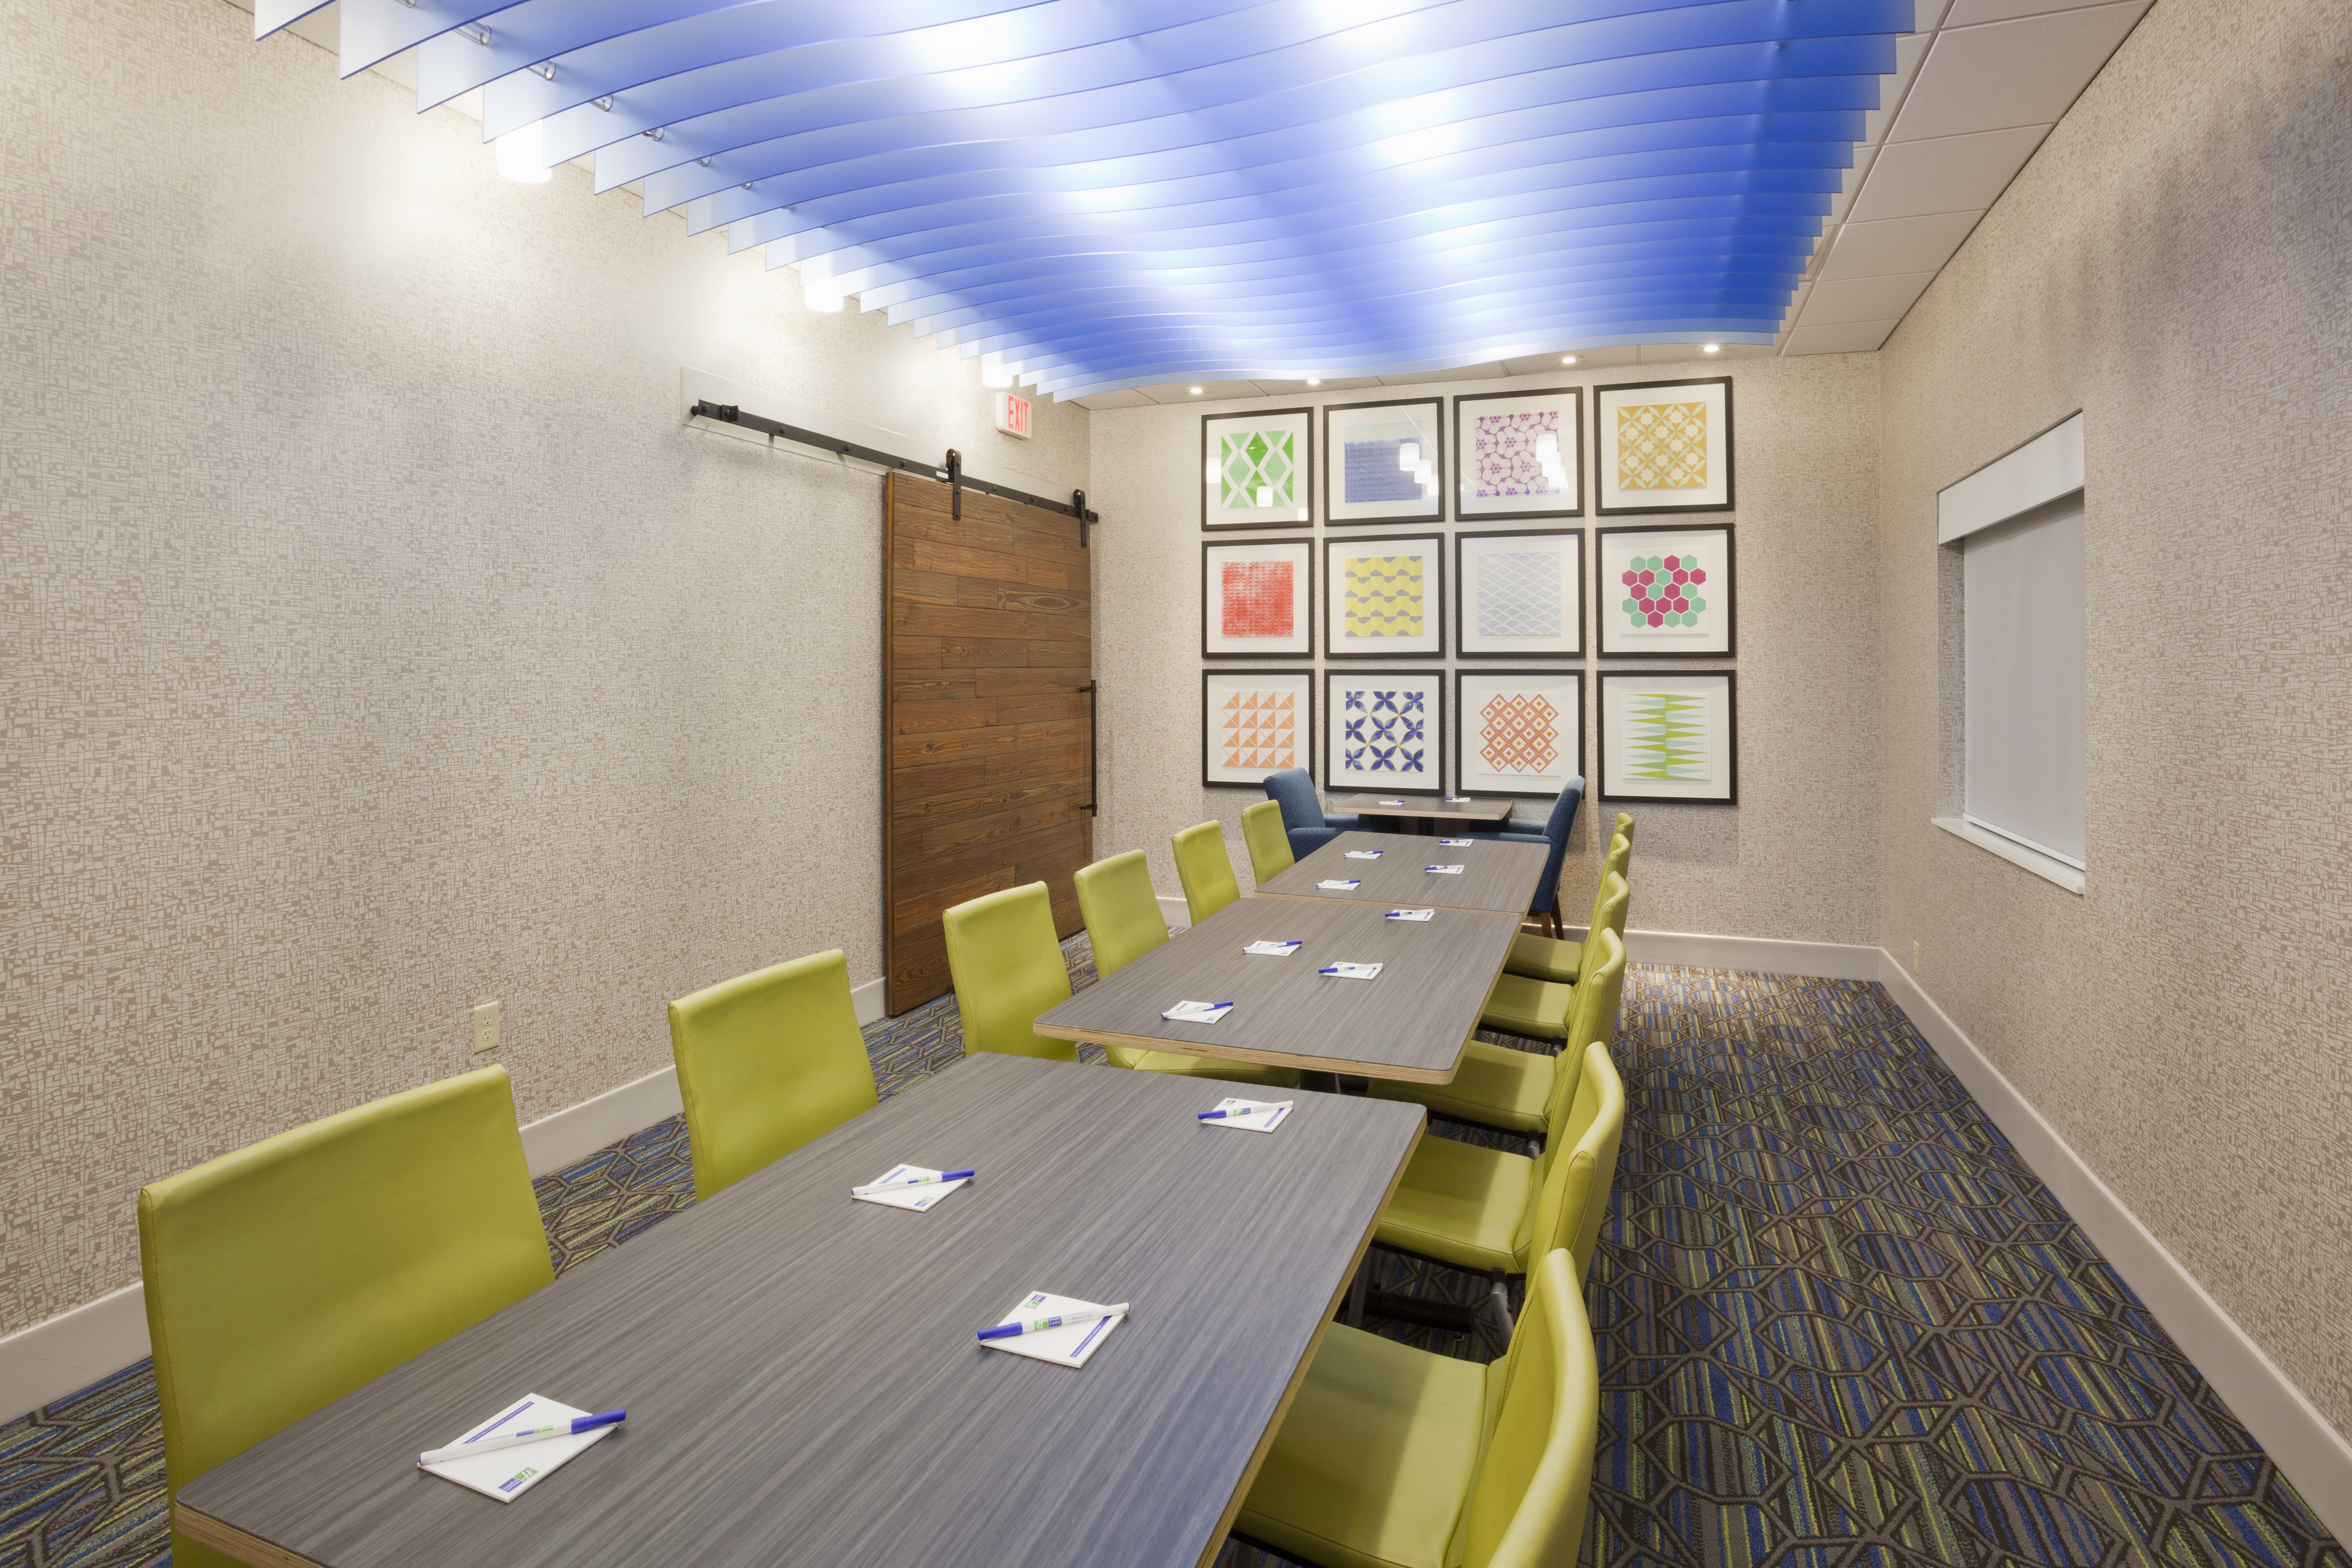 Our board room has a bright design and windows for productive days